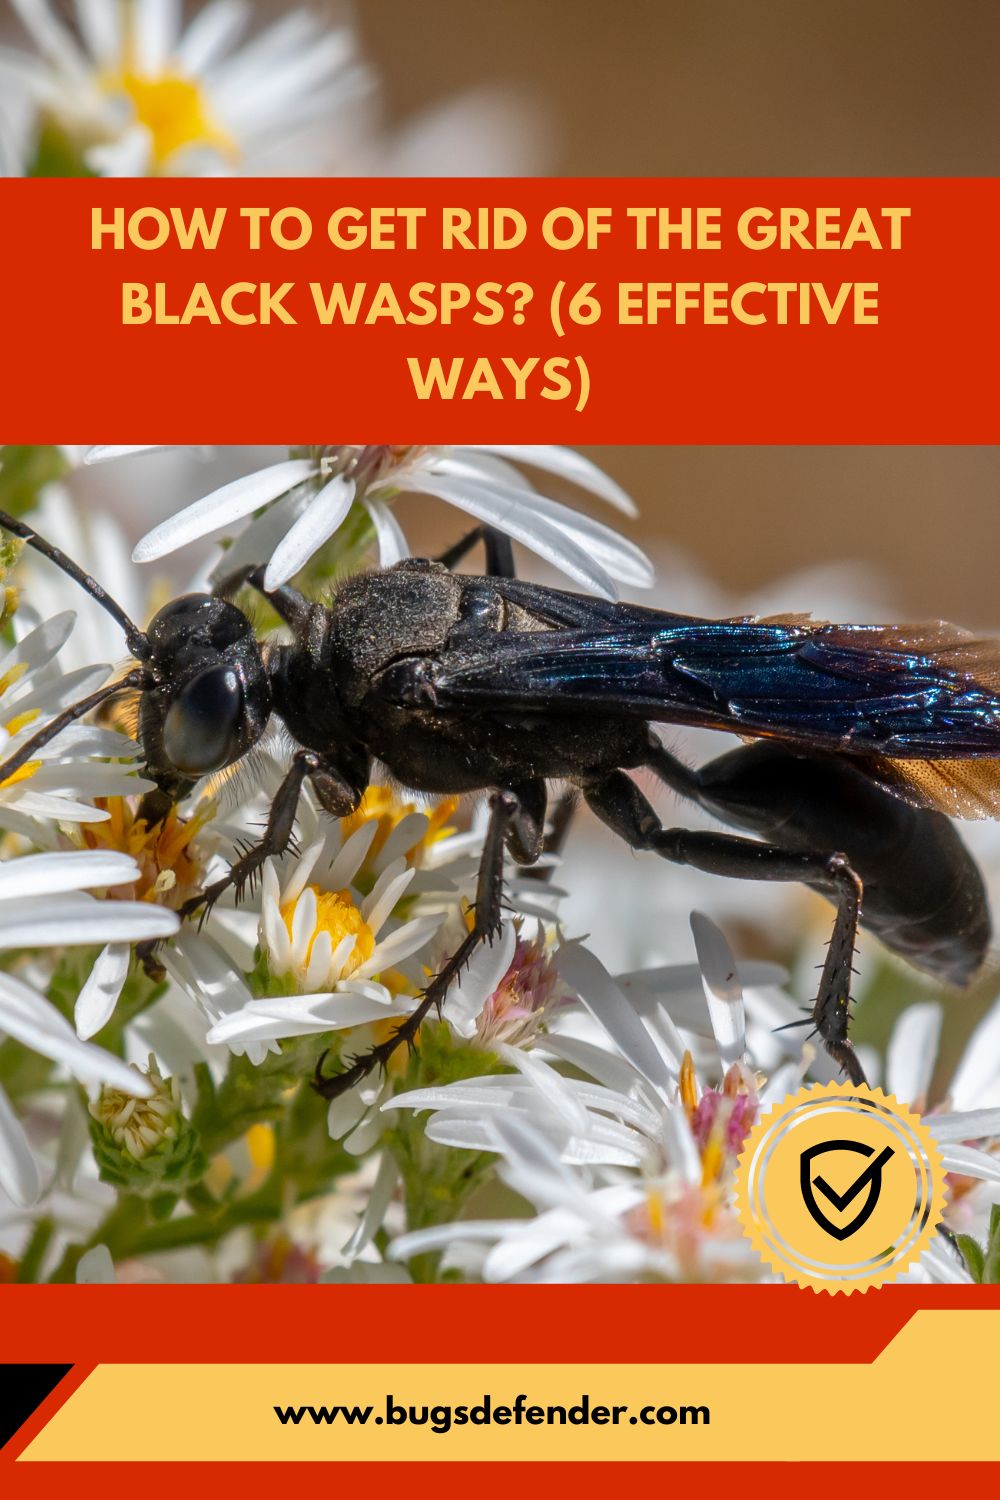 How To Get Rid of The Great Black Wasps (6 Effective Ways) pin1